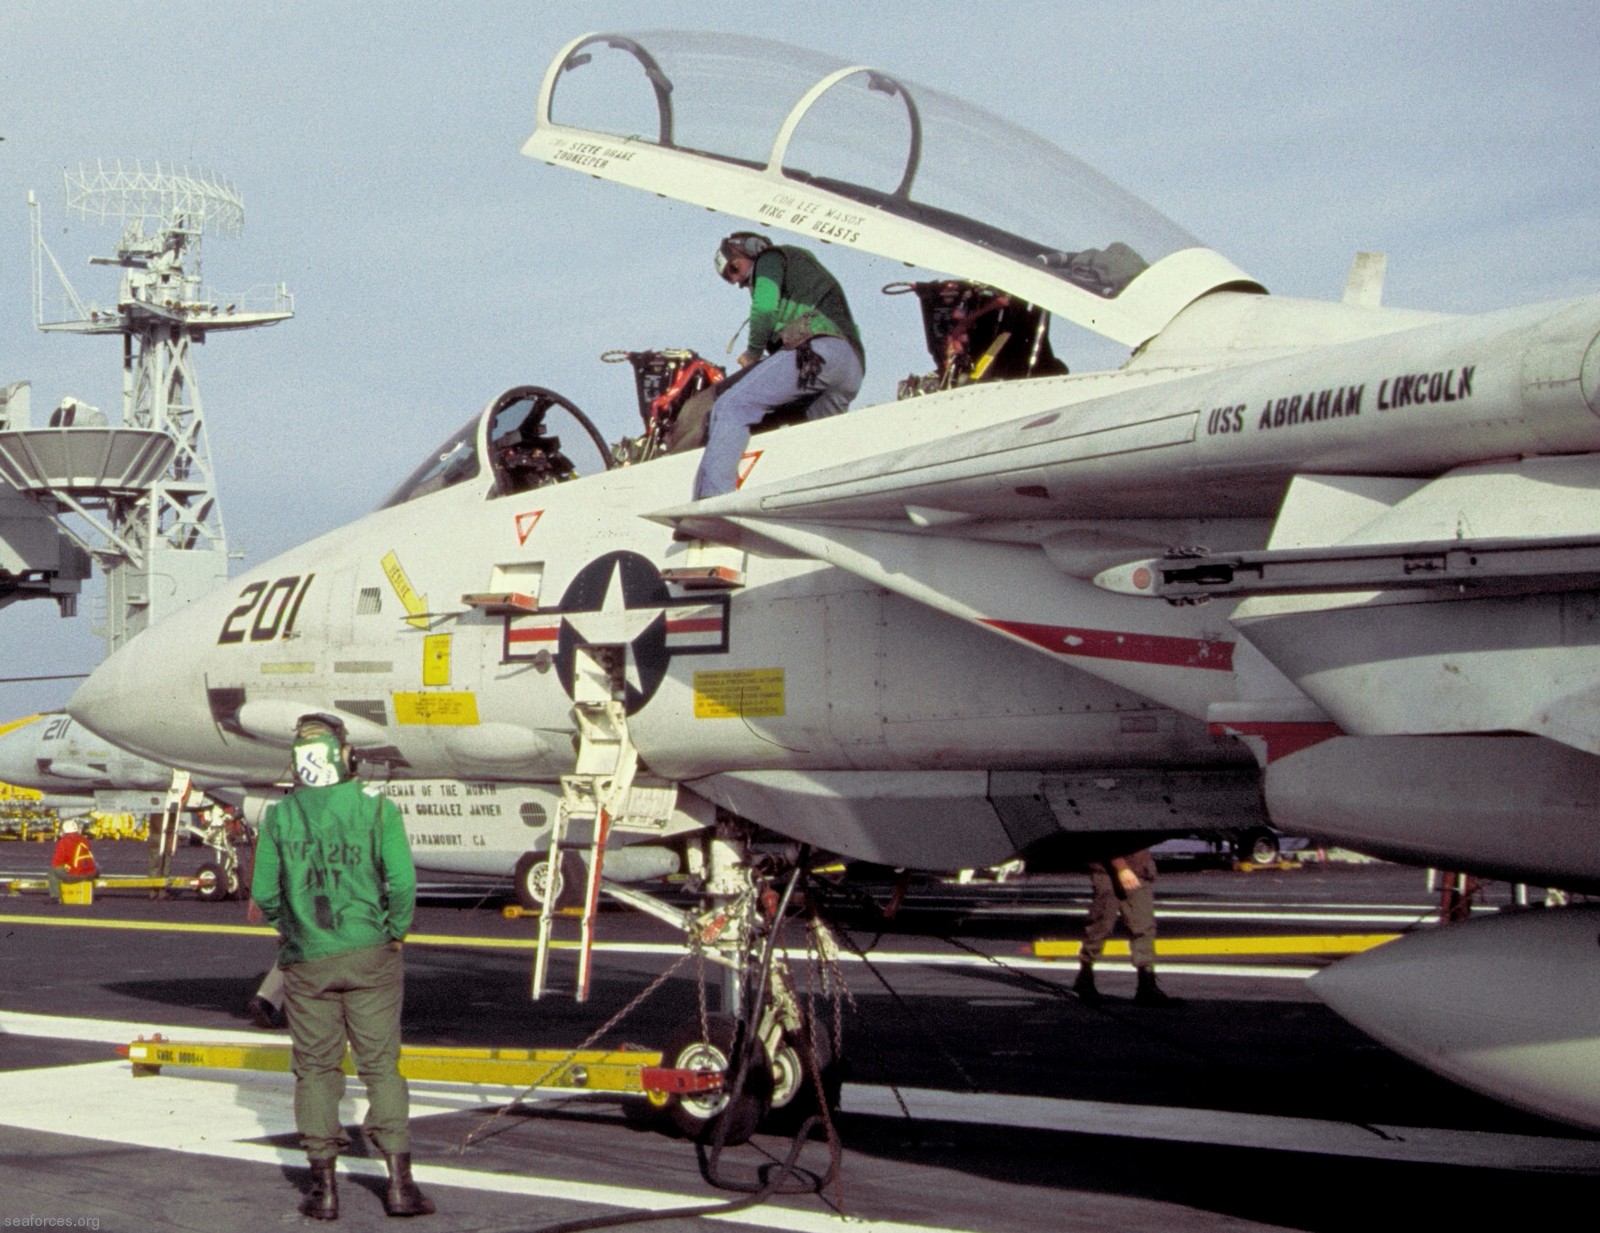 vf-213 black lions fighter squadron us navy f-14a tomcat carrier air wing cvw-11 uss abraham lincoln cvn-72 68